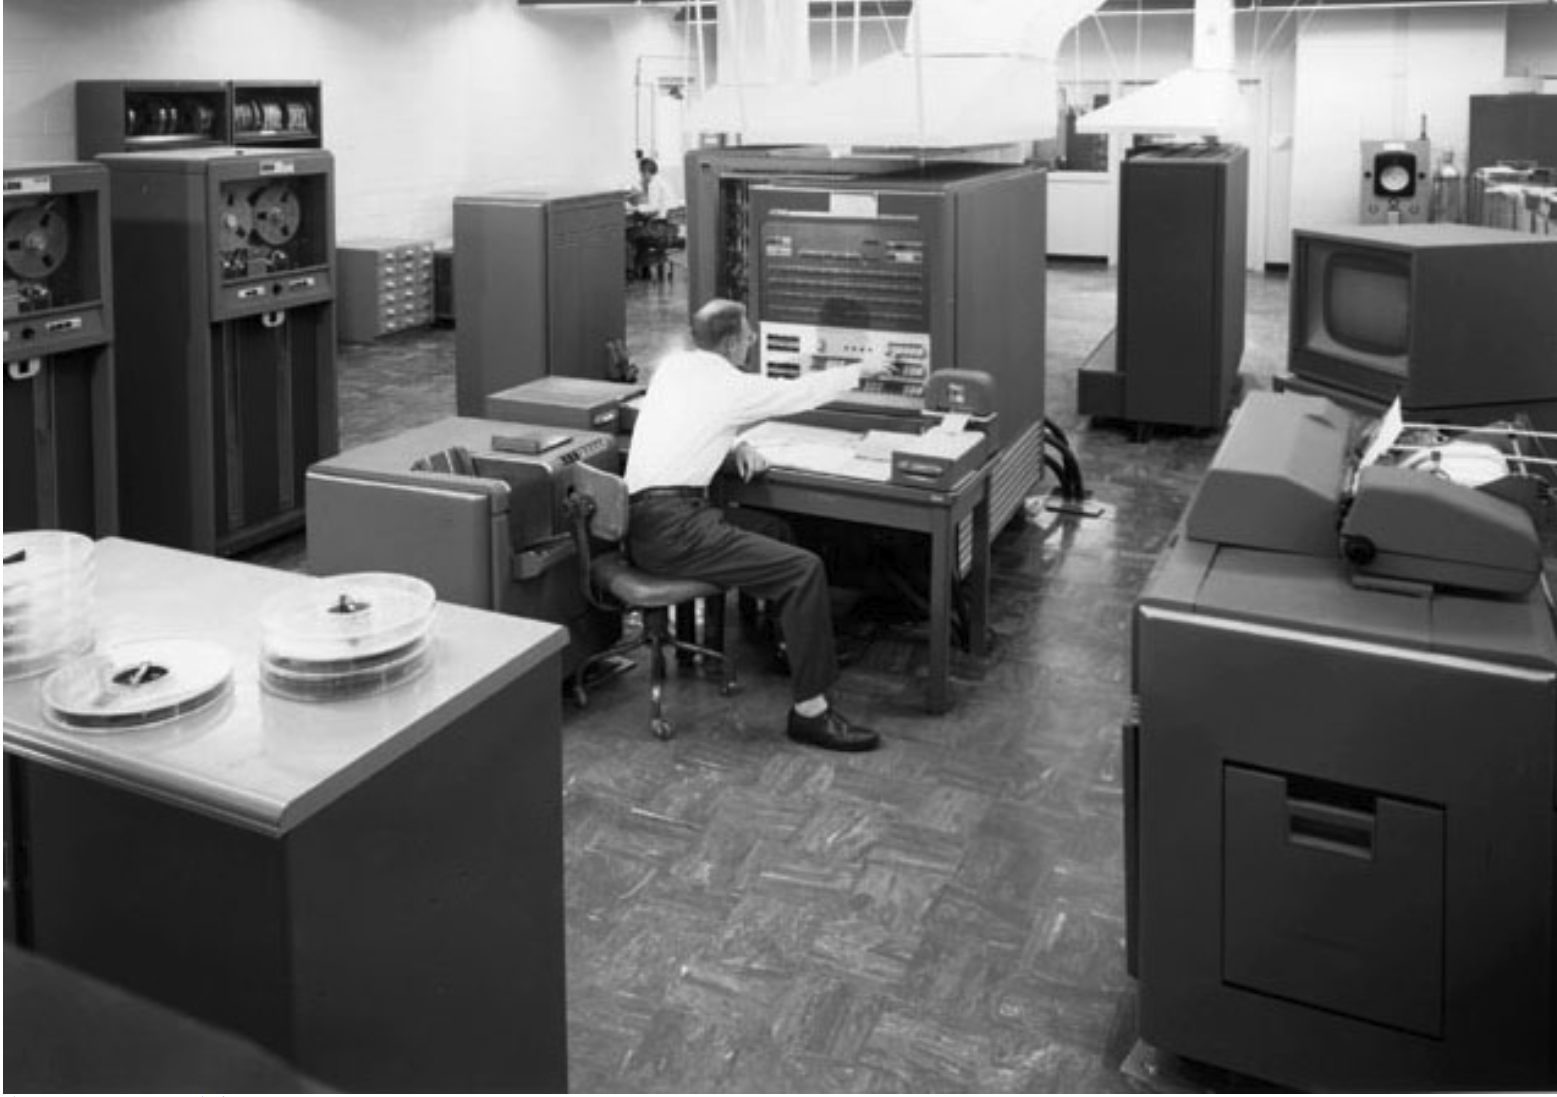 "The IBM 704 Computer (1954). The first mass-produced computer with core memory and floating-point arithmetic, whose designers included John Backus, formerly of IBM Watson Laboratory at Columbia University (who also was the principal designer of FORTRAN, the first widespread high-level language for computer programming), as well as Gene Amdahl (who would go on to become chief architect for the IBM 360 and later start his own company to rival IBM). The 704